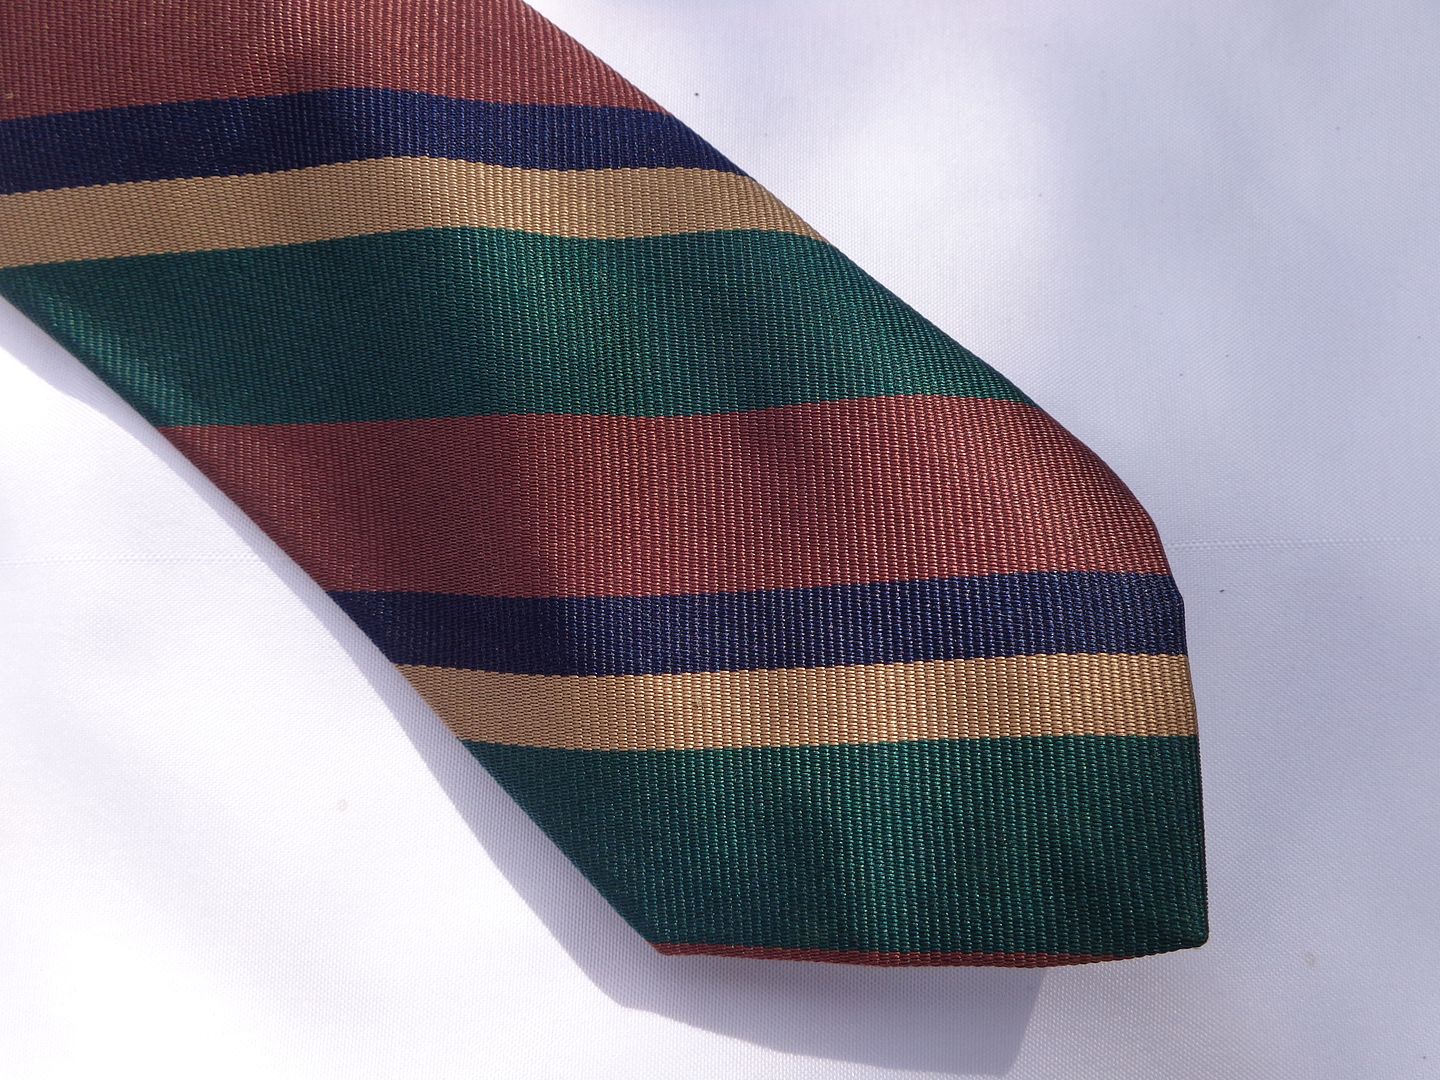 27 Regimental Ties! From the 1950s, 1960s to now. All under $16 shipped ...